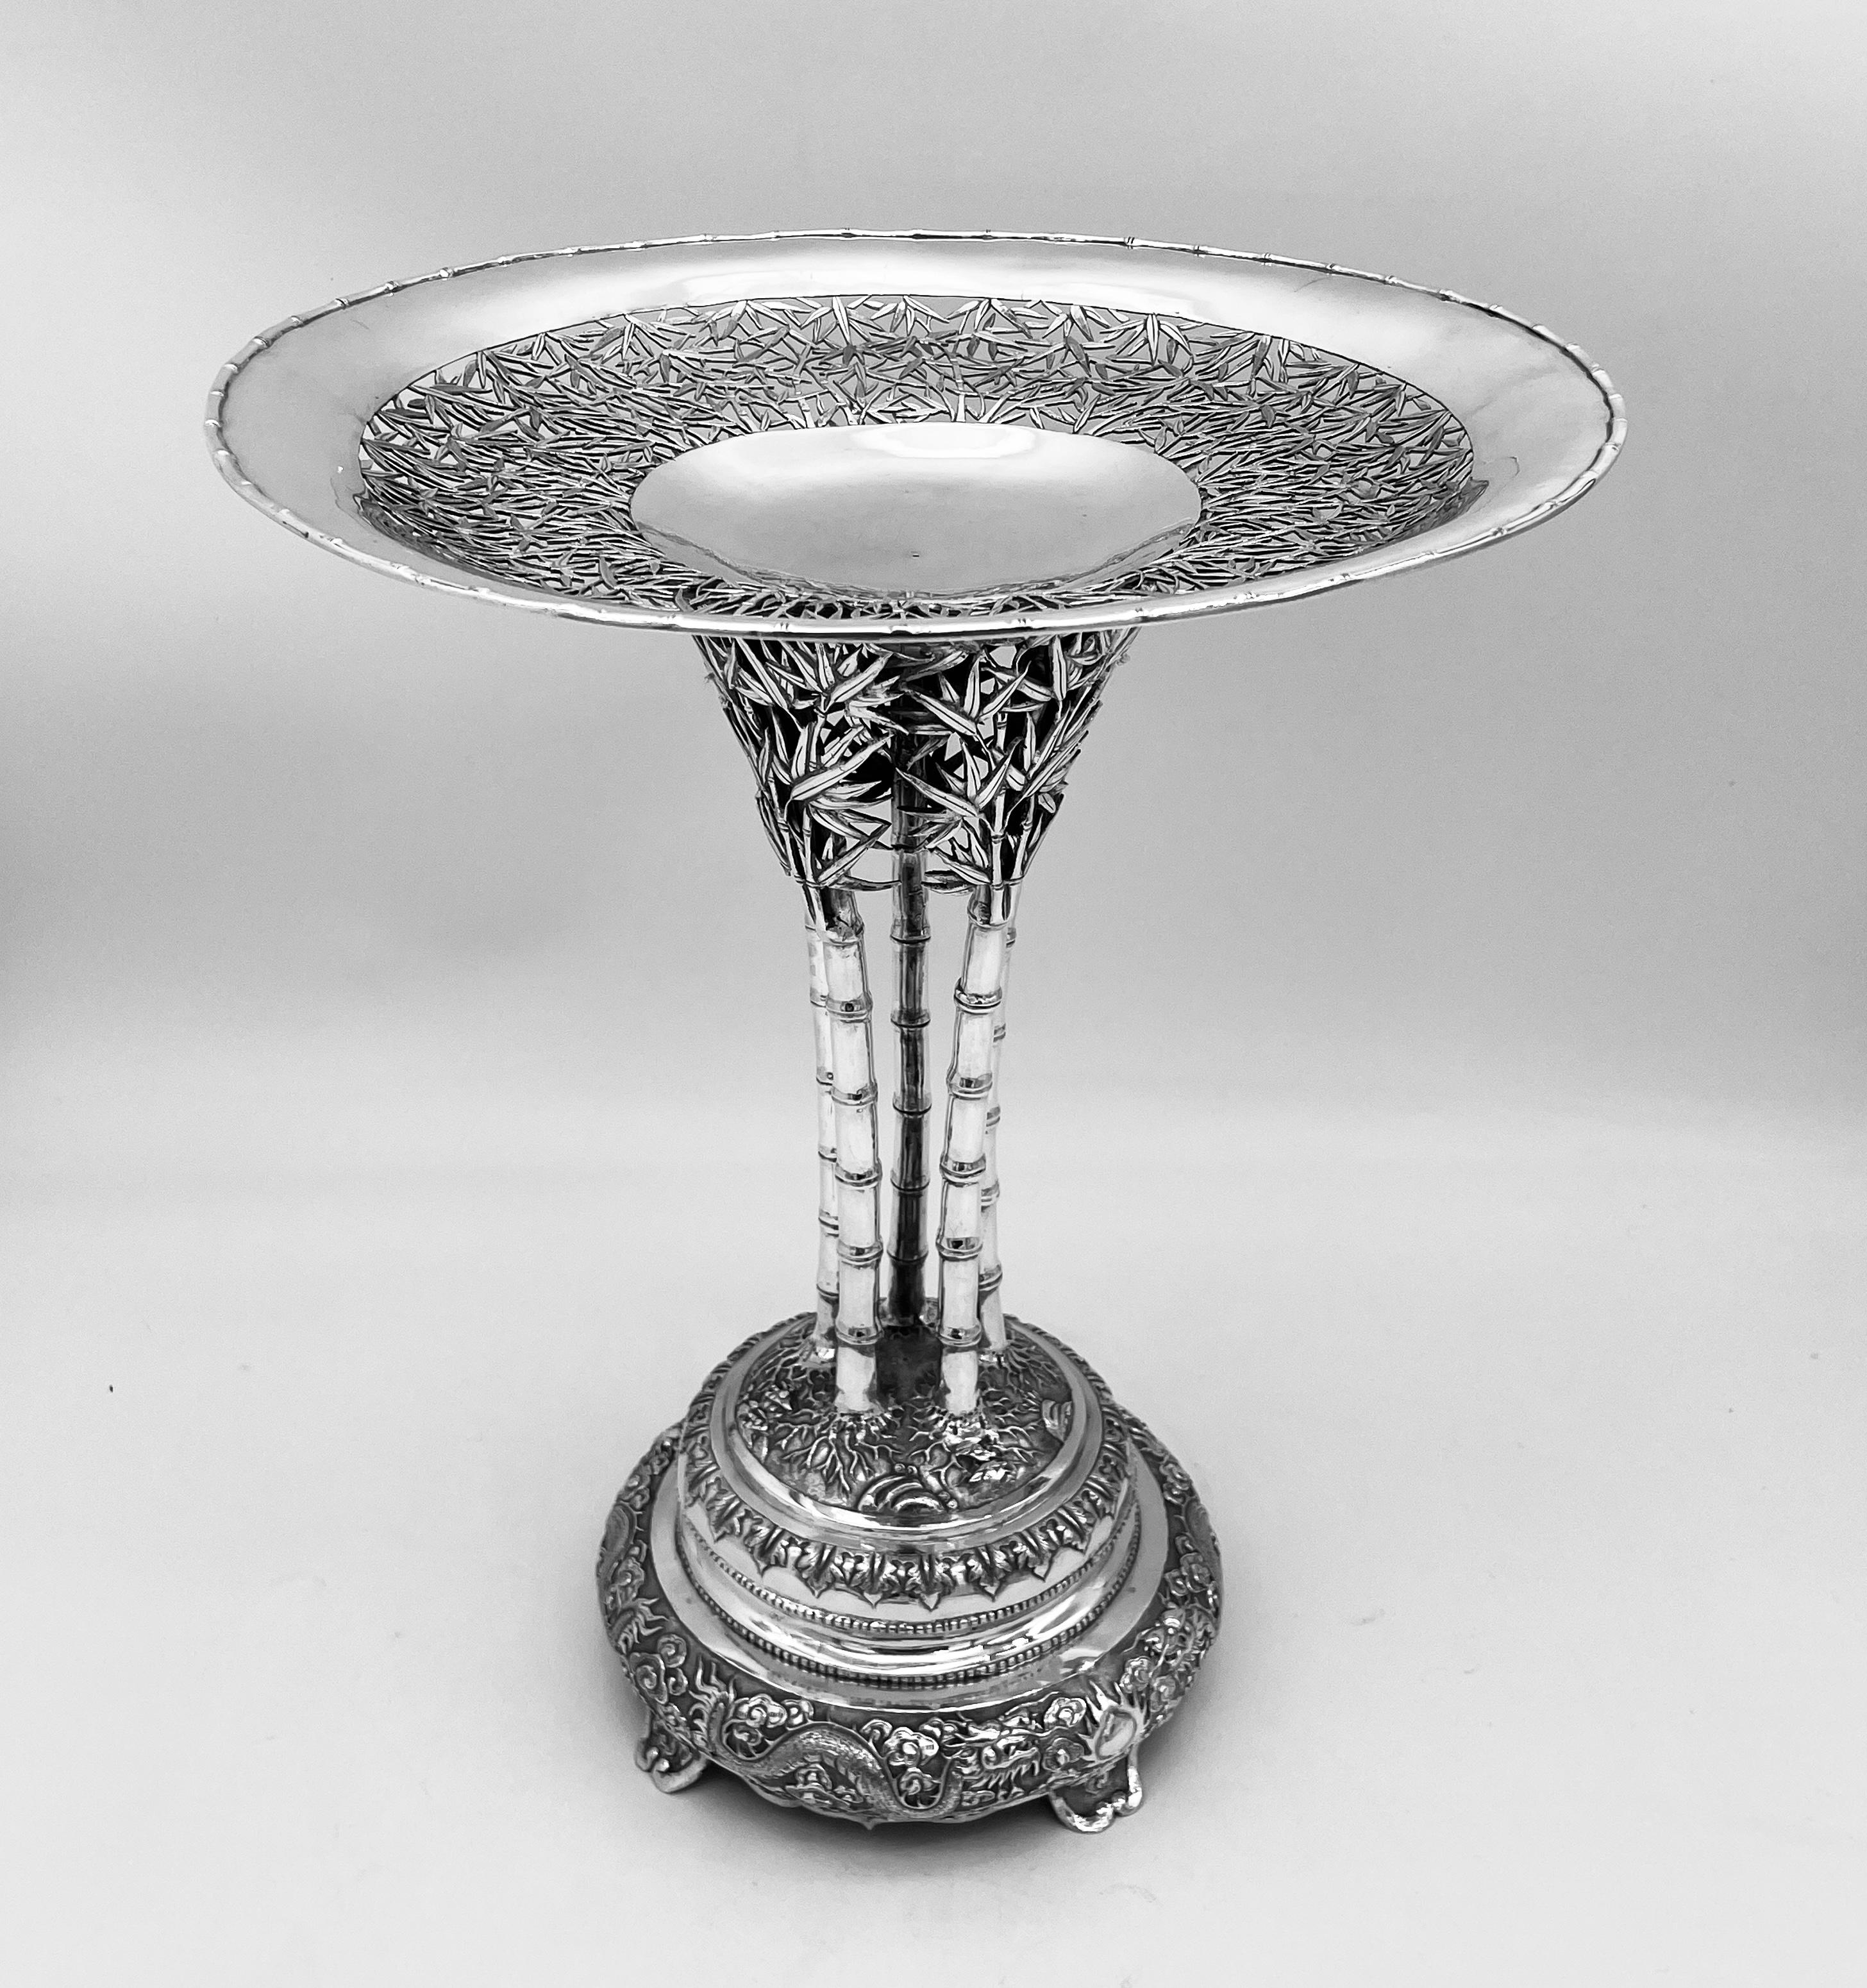 This impressive Chinese Export Silver Centrepiece,  consists of a large central dish, pierced with bamboo decoration, supported by five shoots of bamboo also with bamboo leaf decoration. The base which rests on four feet, has two pairs of opposing